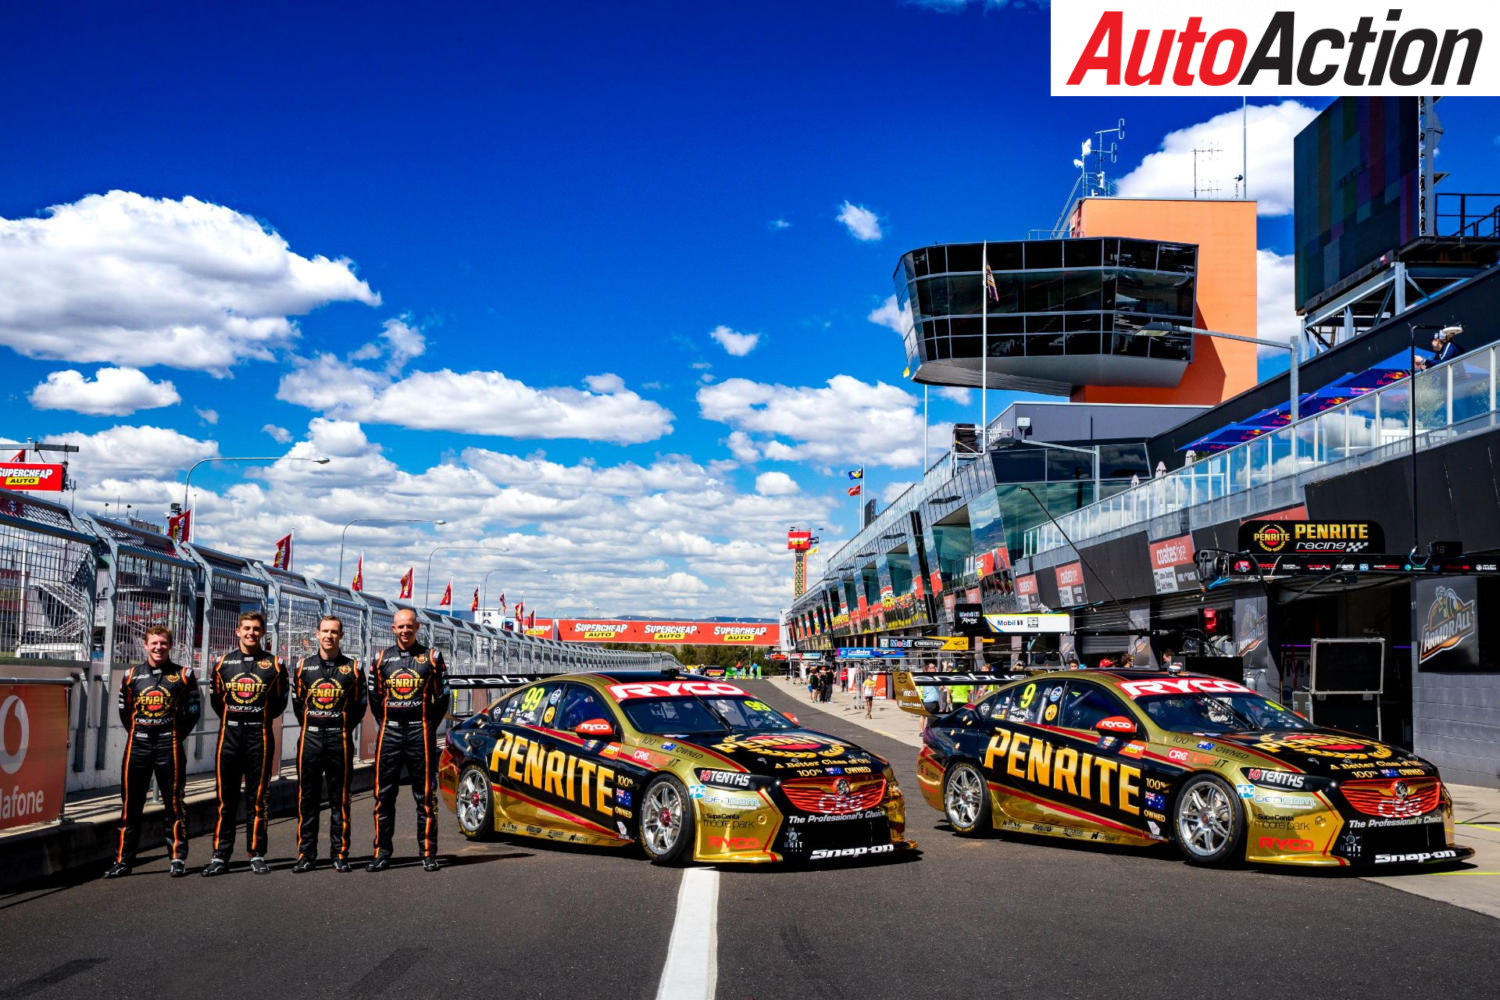 Revised Penrite livery for Bathurst - Photo: Supplied